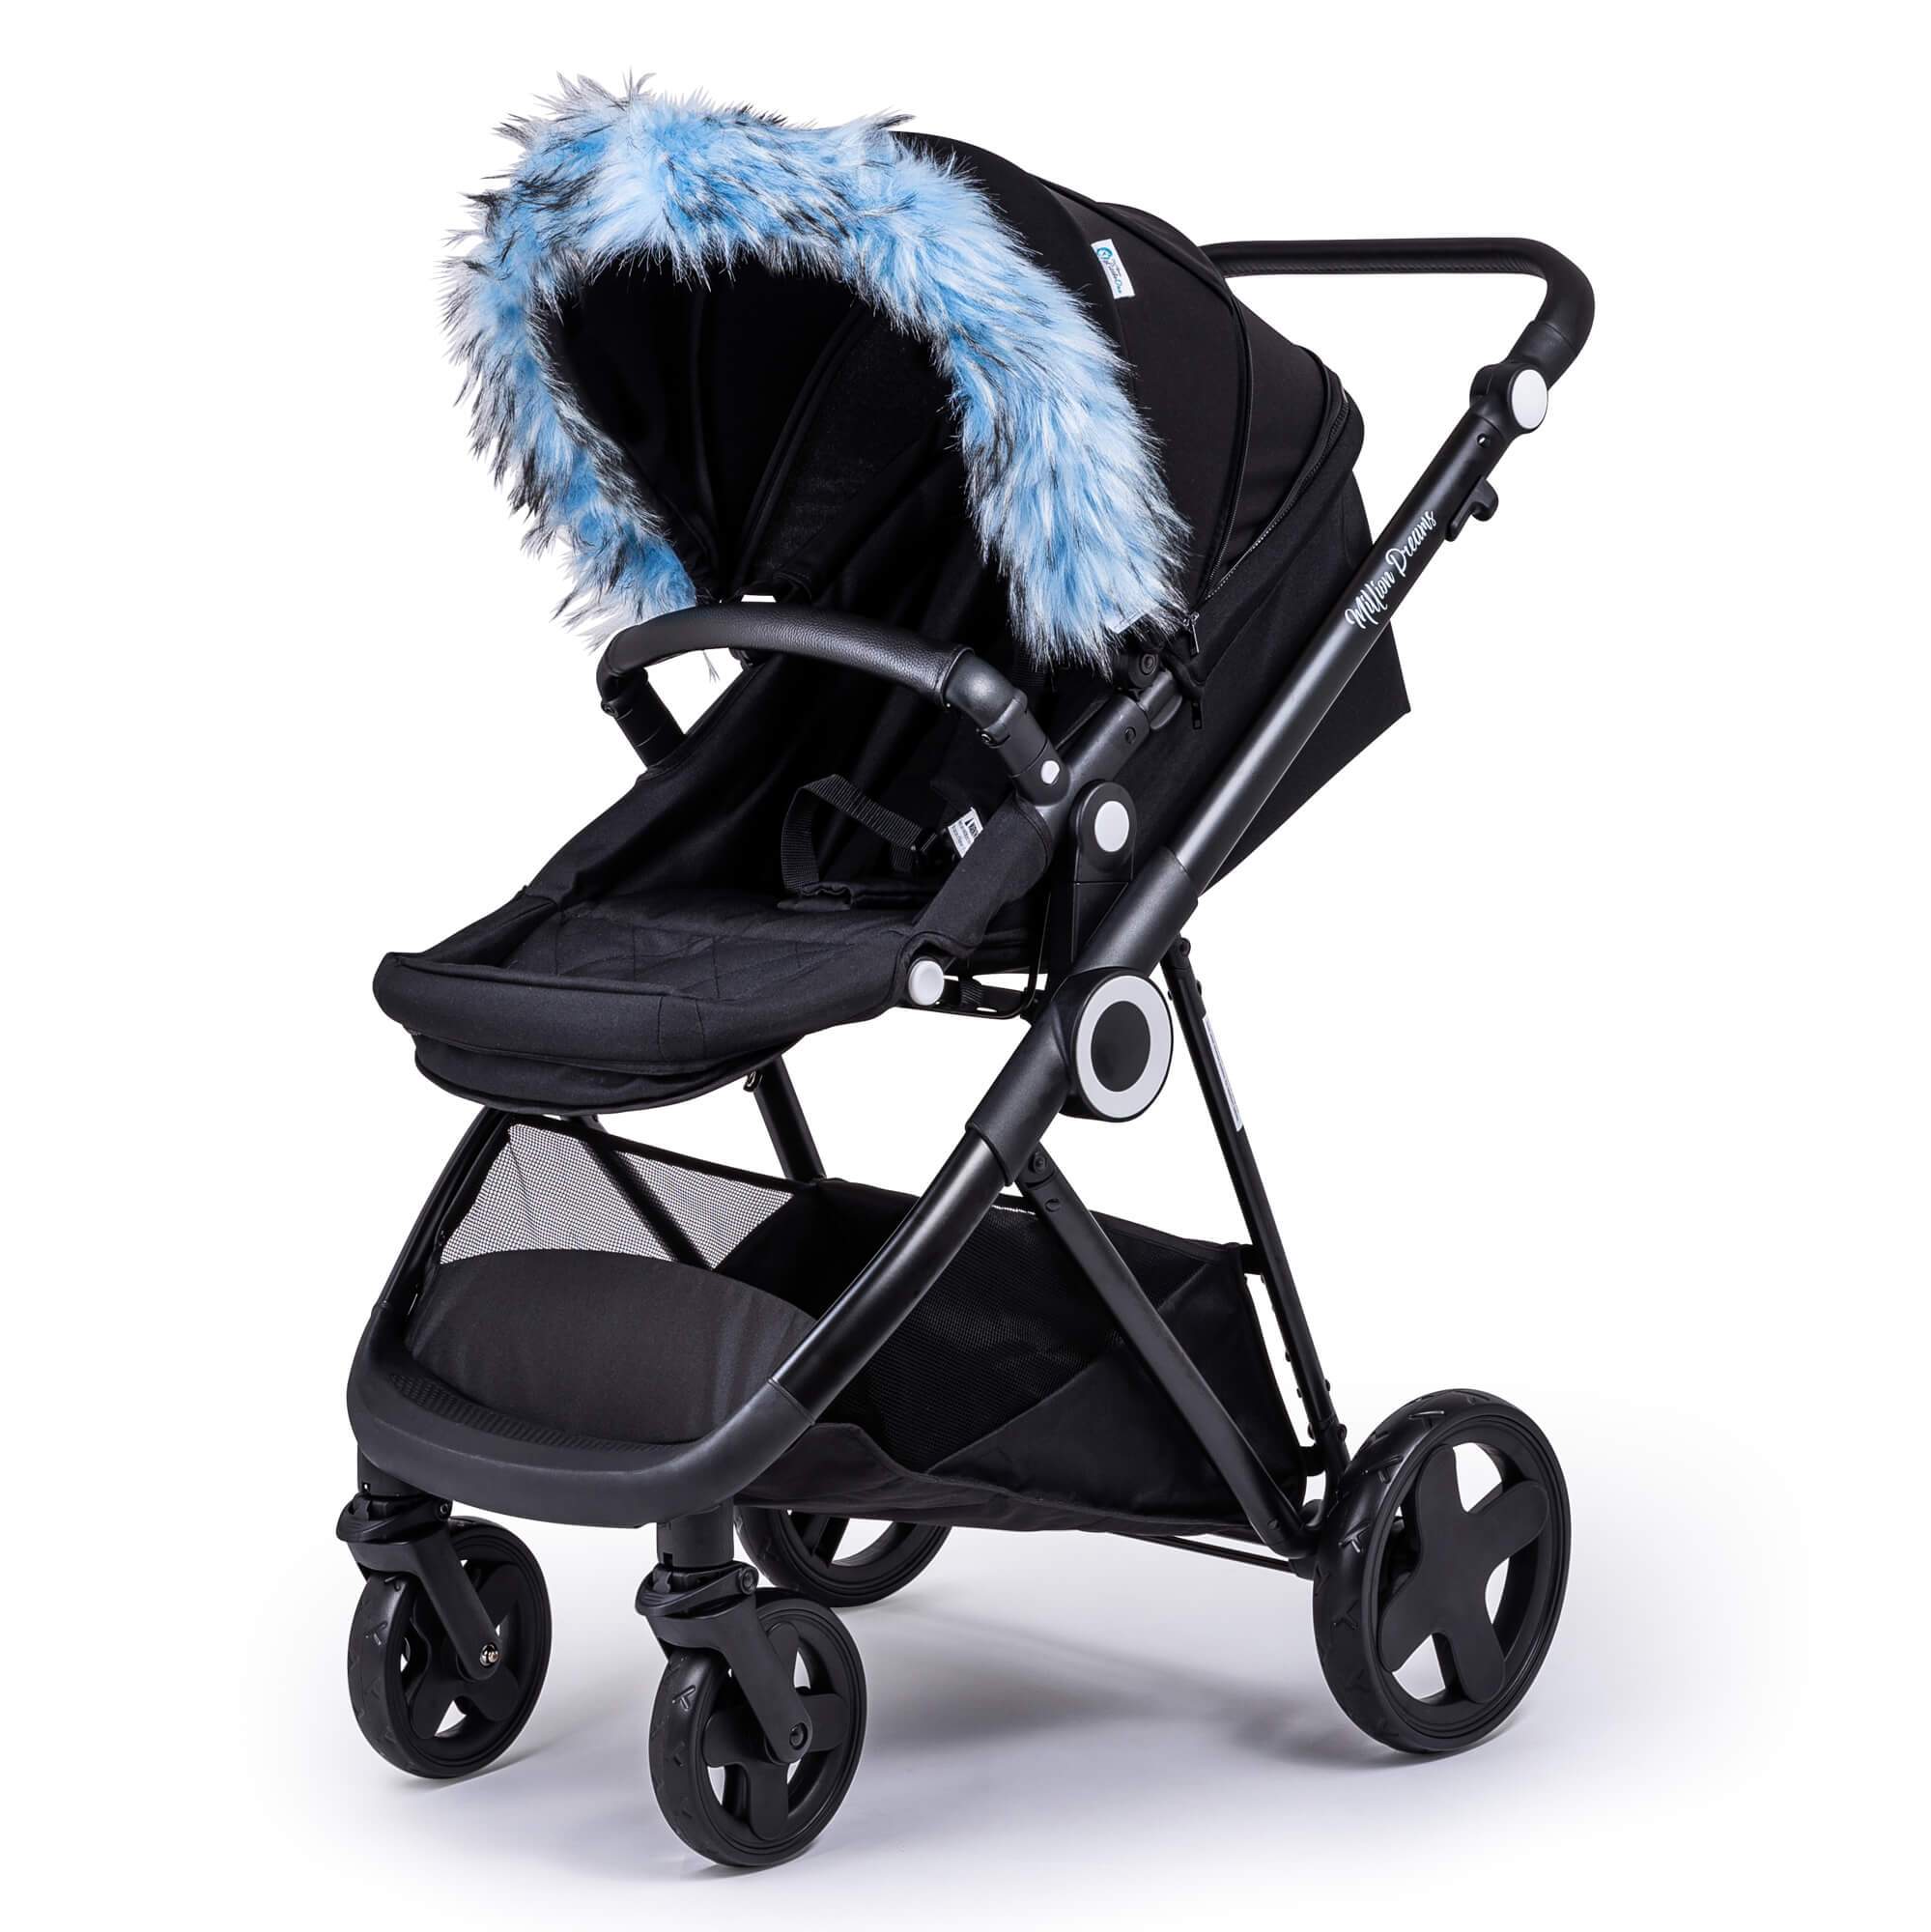 Pram Fur Hood Trim Attachment For Pushchair Compatible with Orbit Baby - Light Blue / Fits All Models | For Your Little One